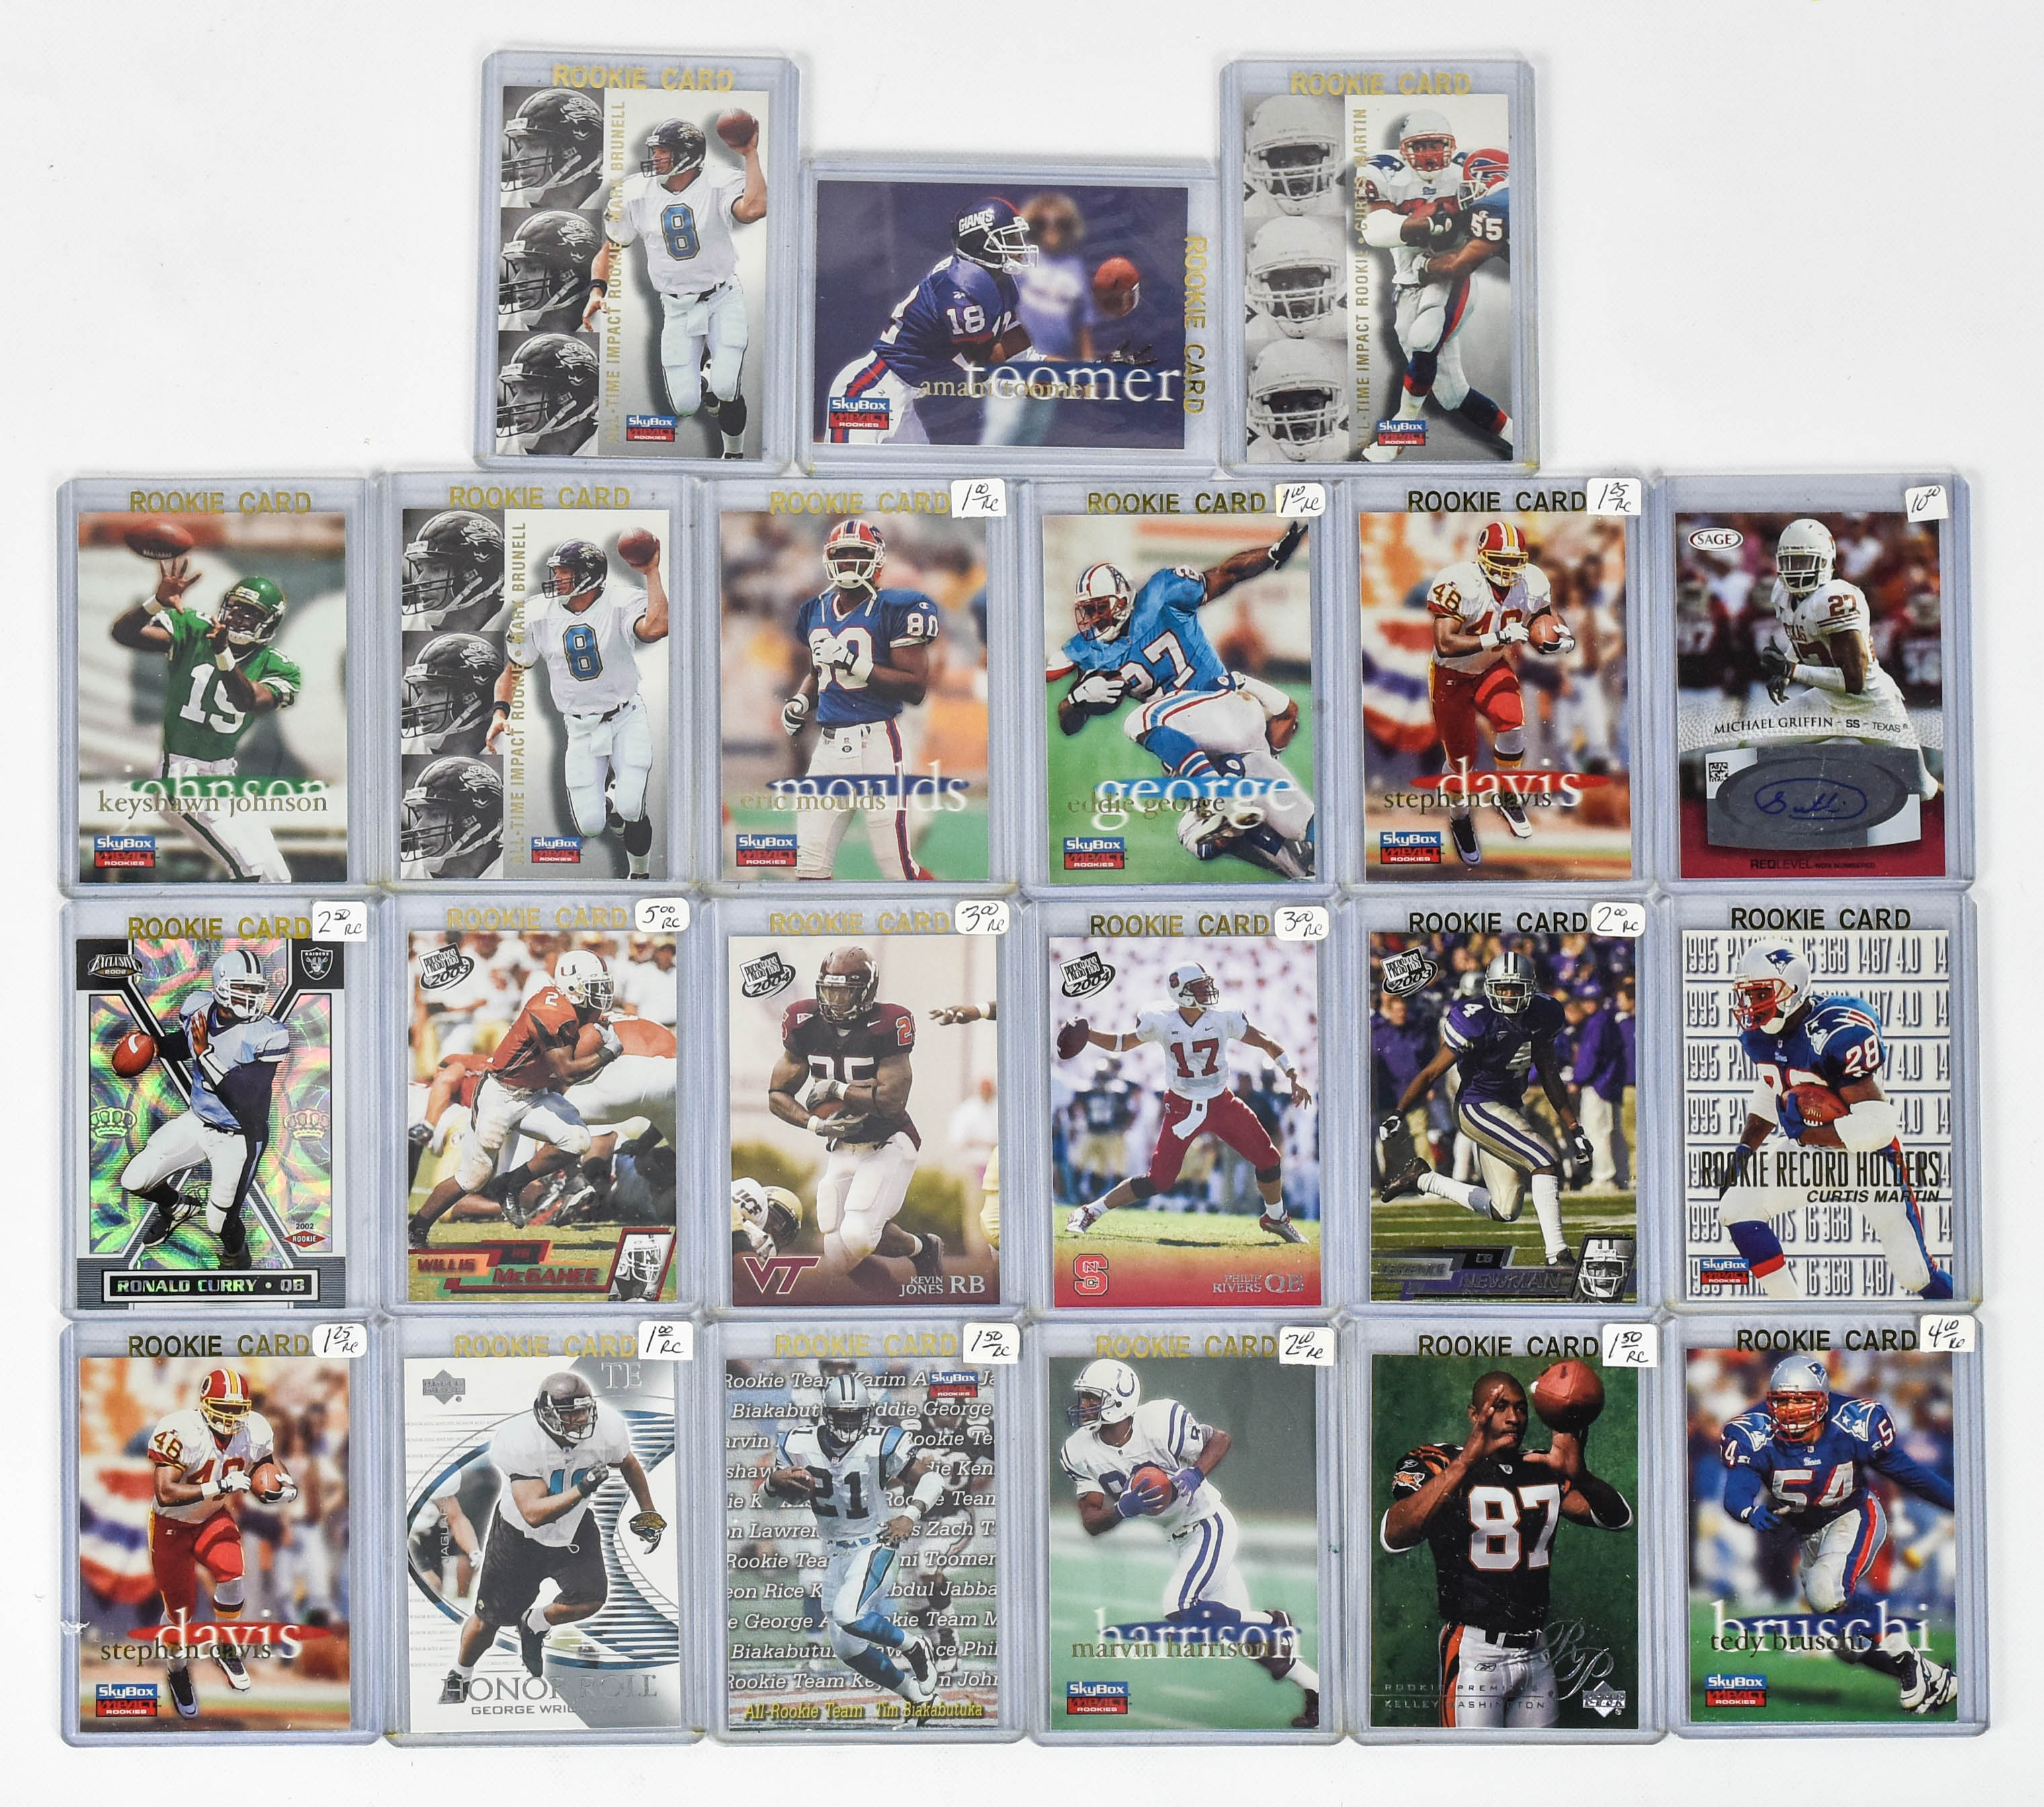 21 Early 2000s Era NFL Rookie Football Cards with 800 Mint Cards